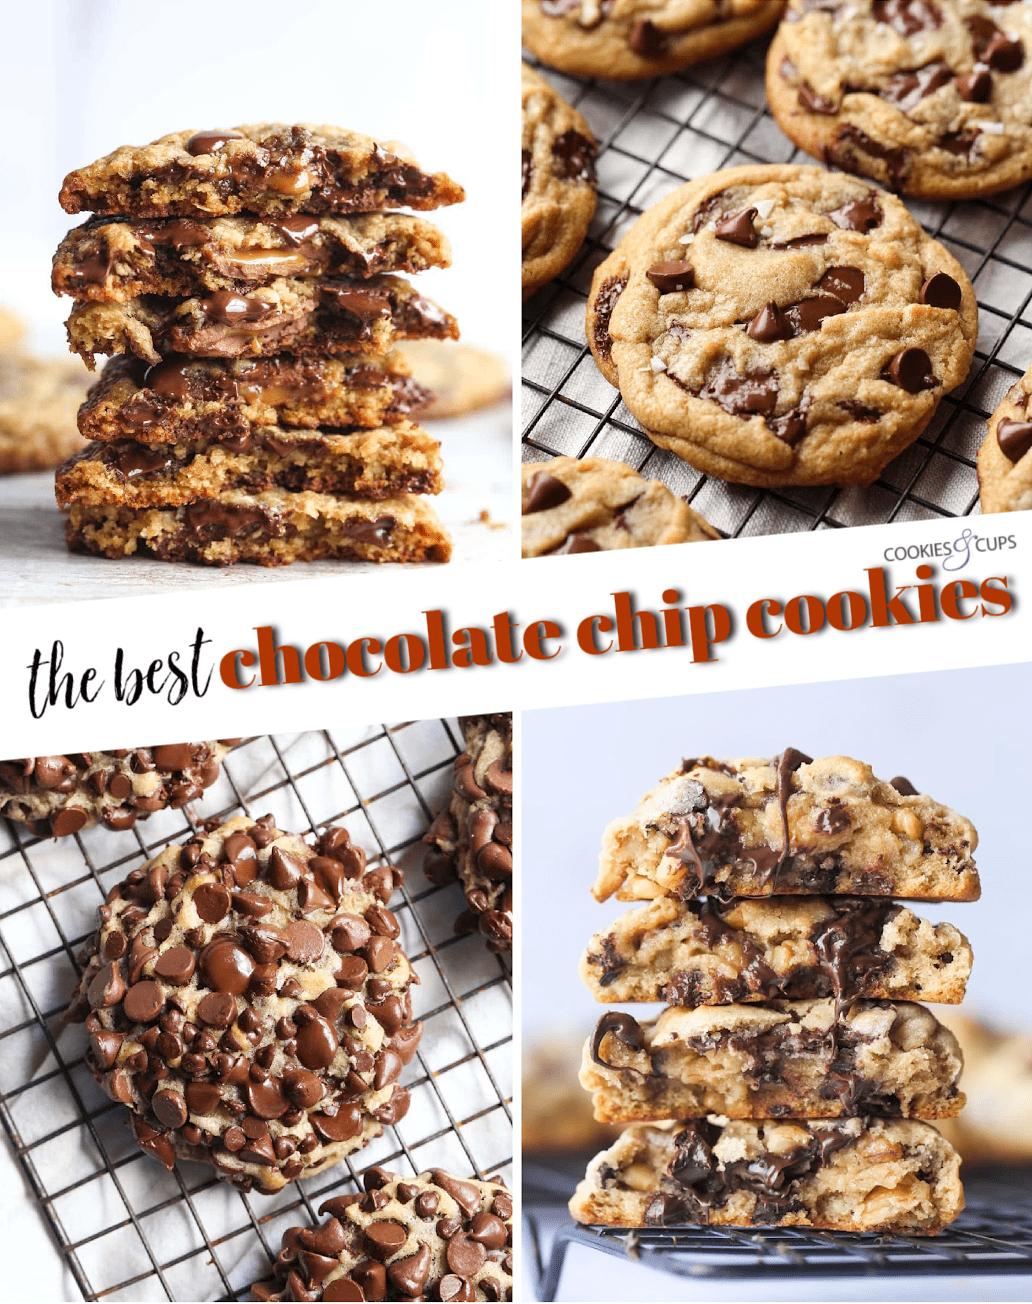 The Best Chocolate Chip Cookies Pinterest Image